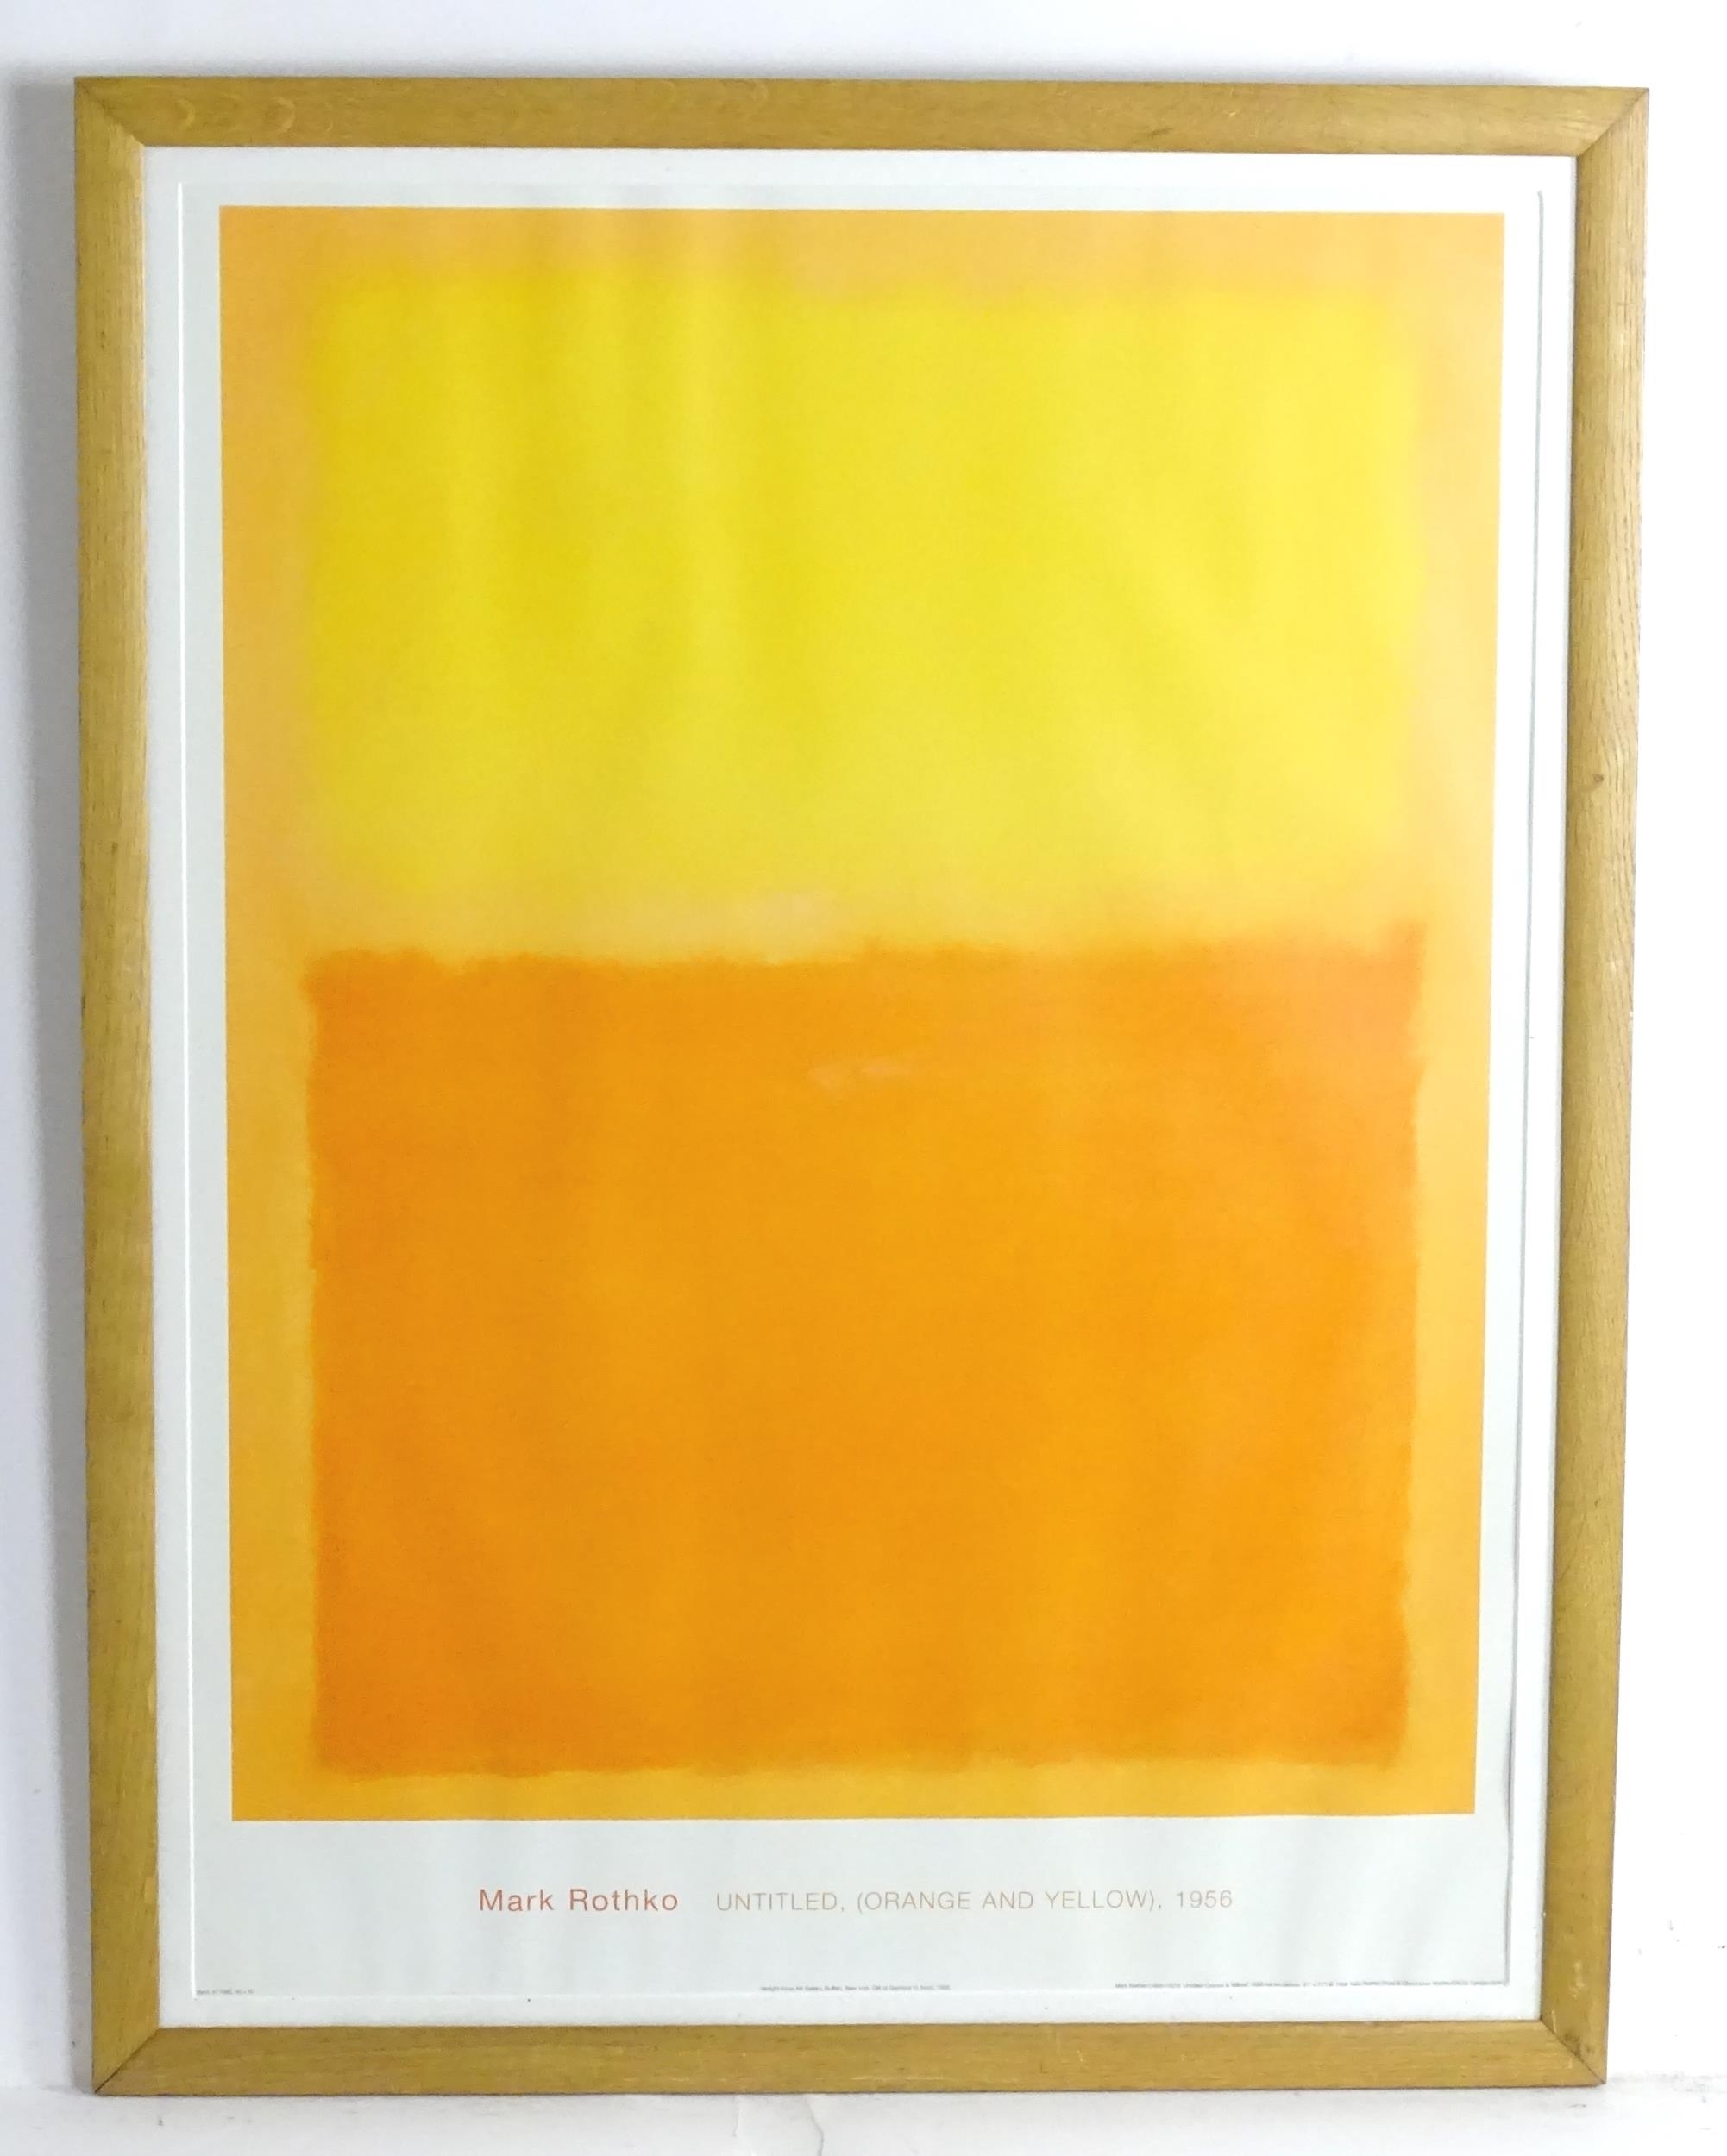 Artwork by Mark Rothko, Orange and yellow., Made of Offset lithograph